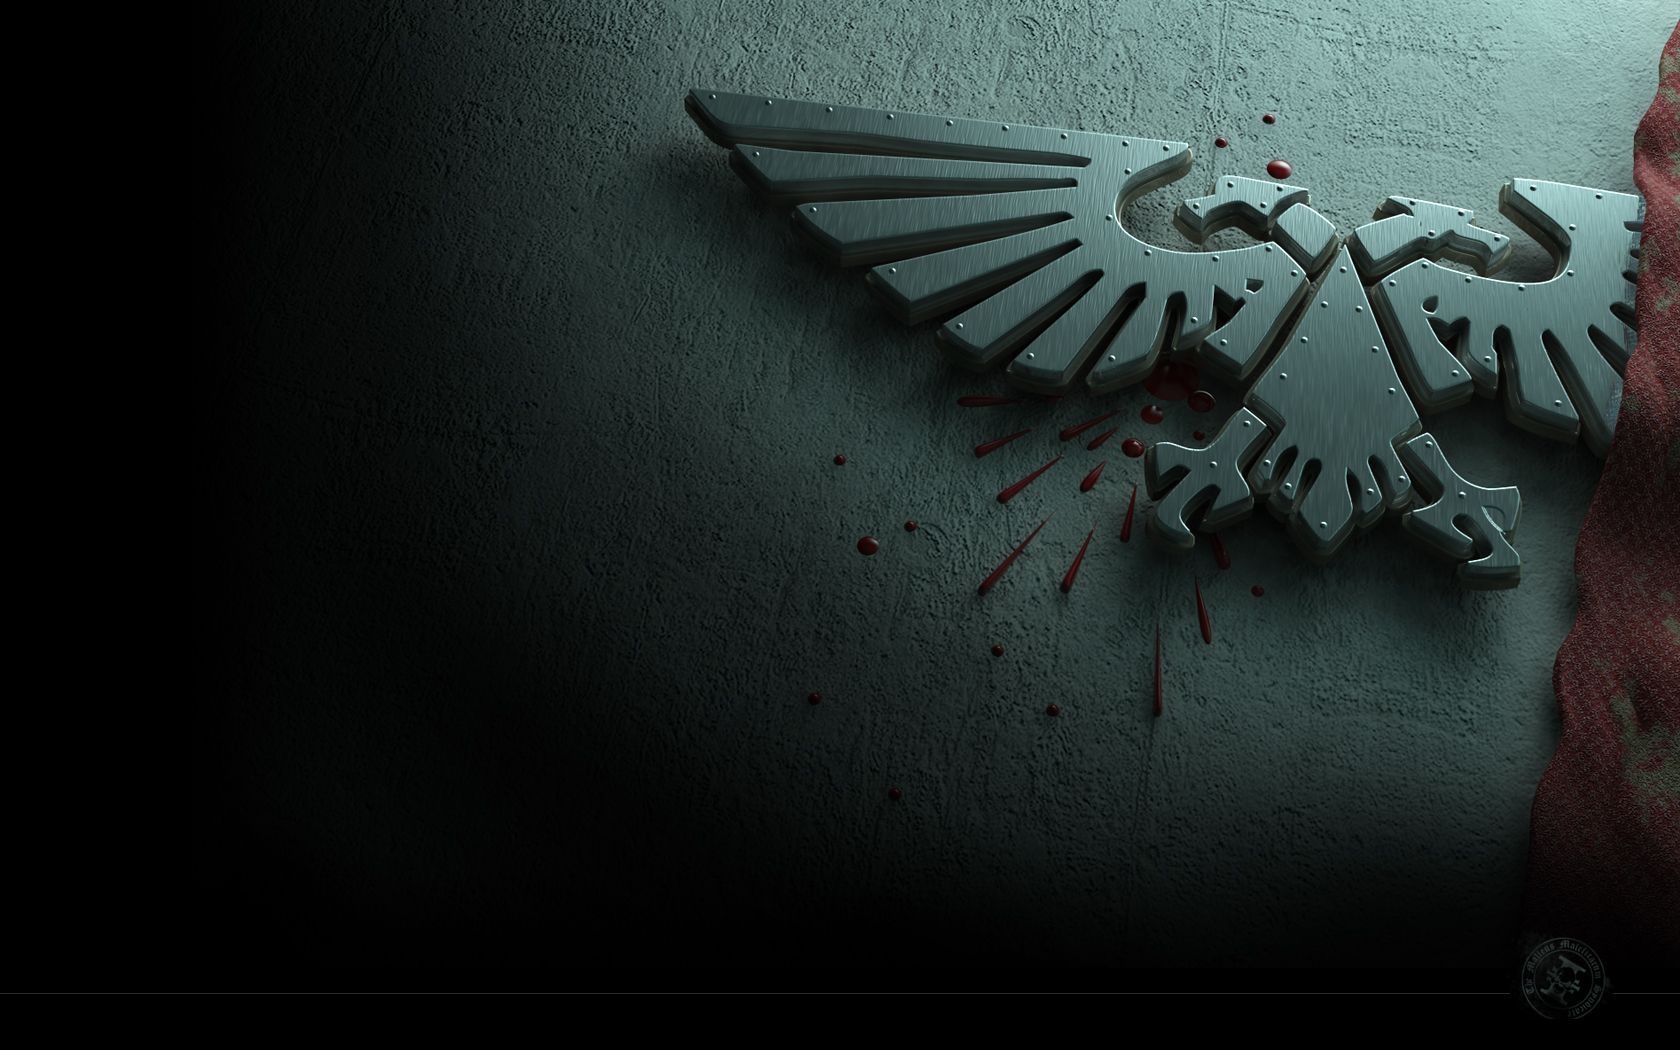 Warhammer 40k Quotes Wallpapers. QuotesGram